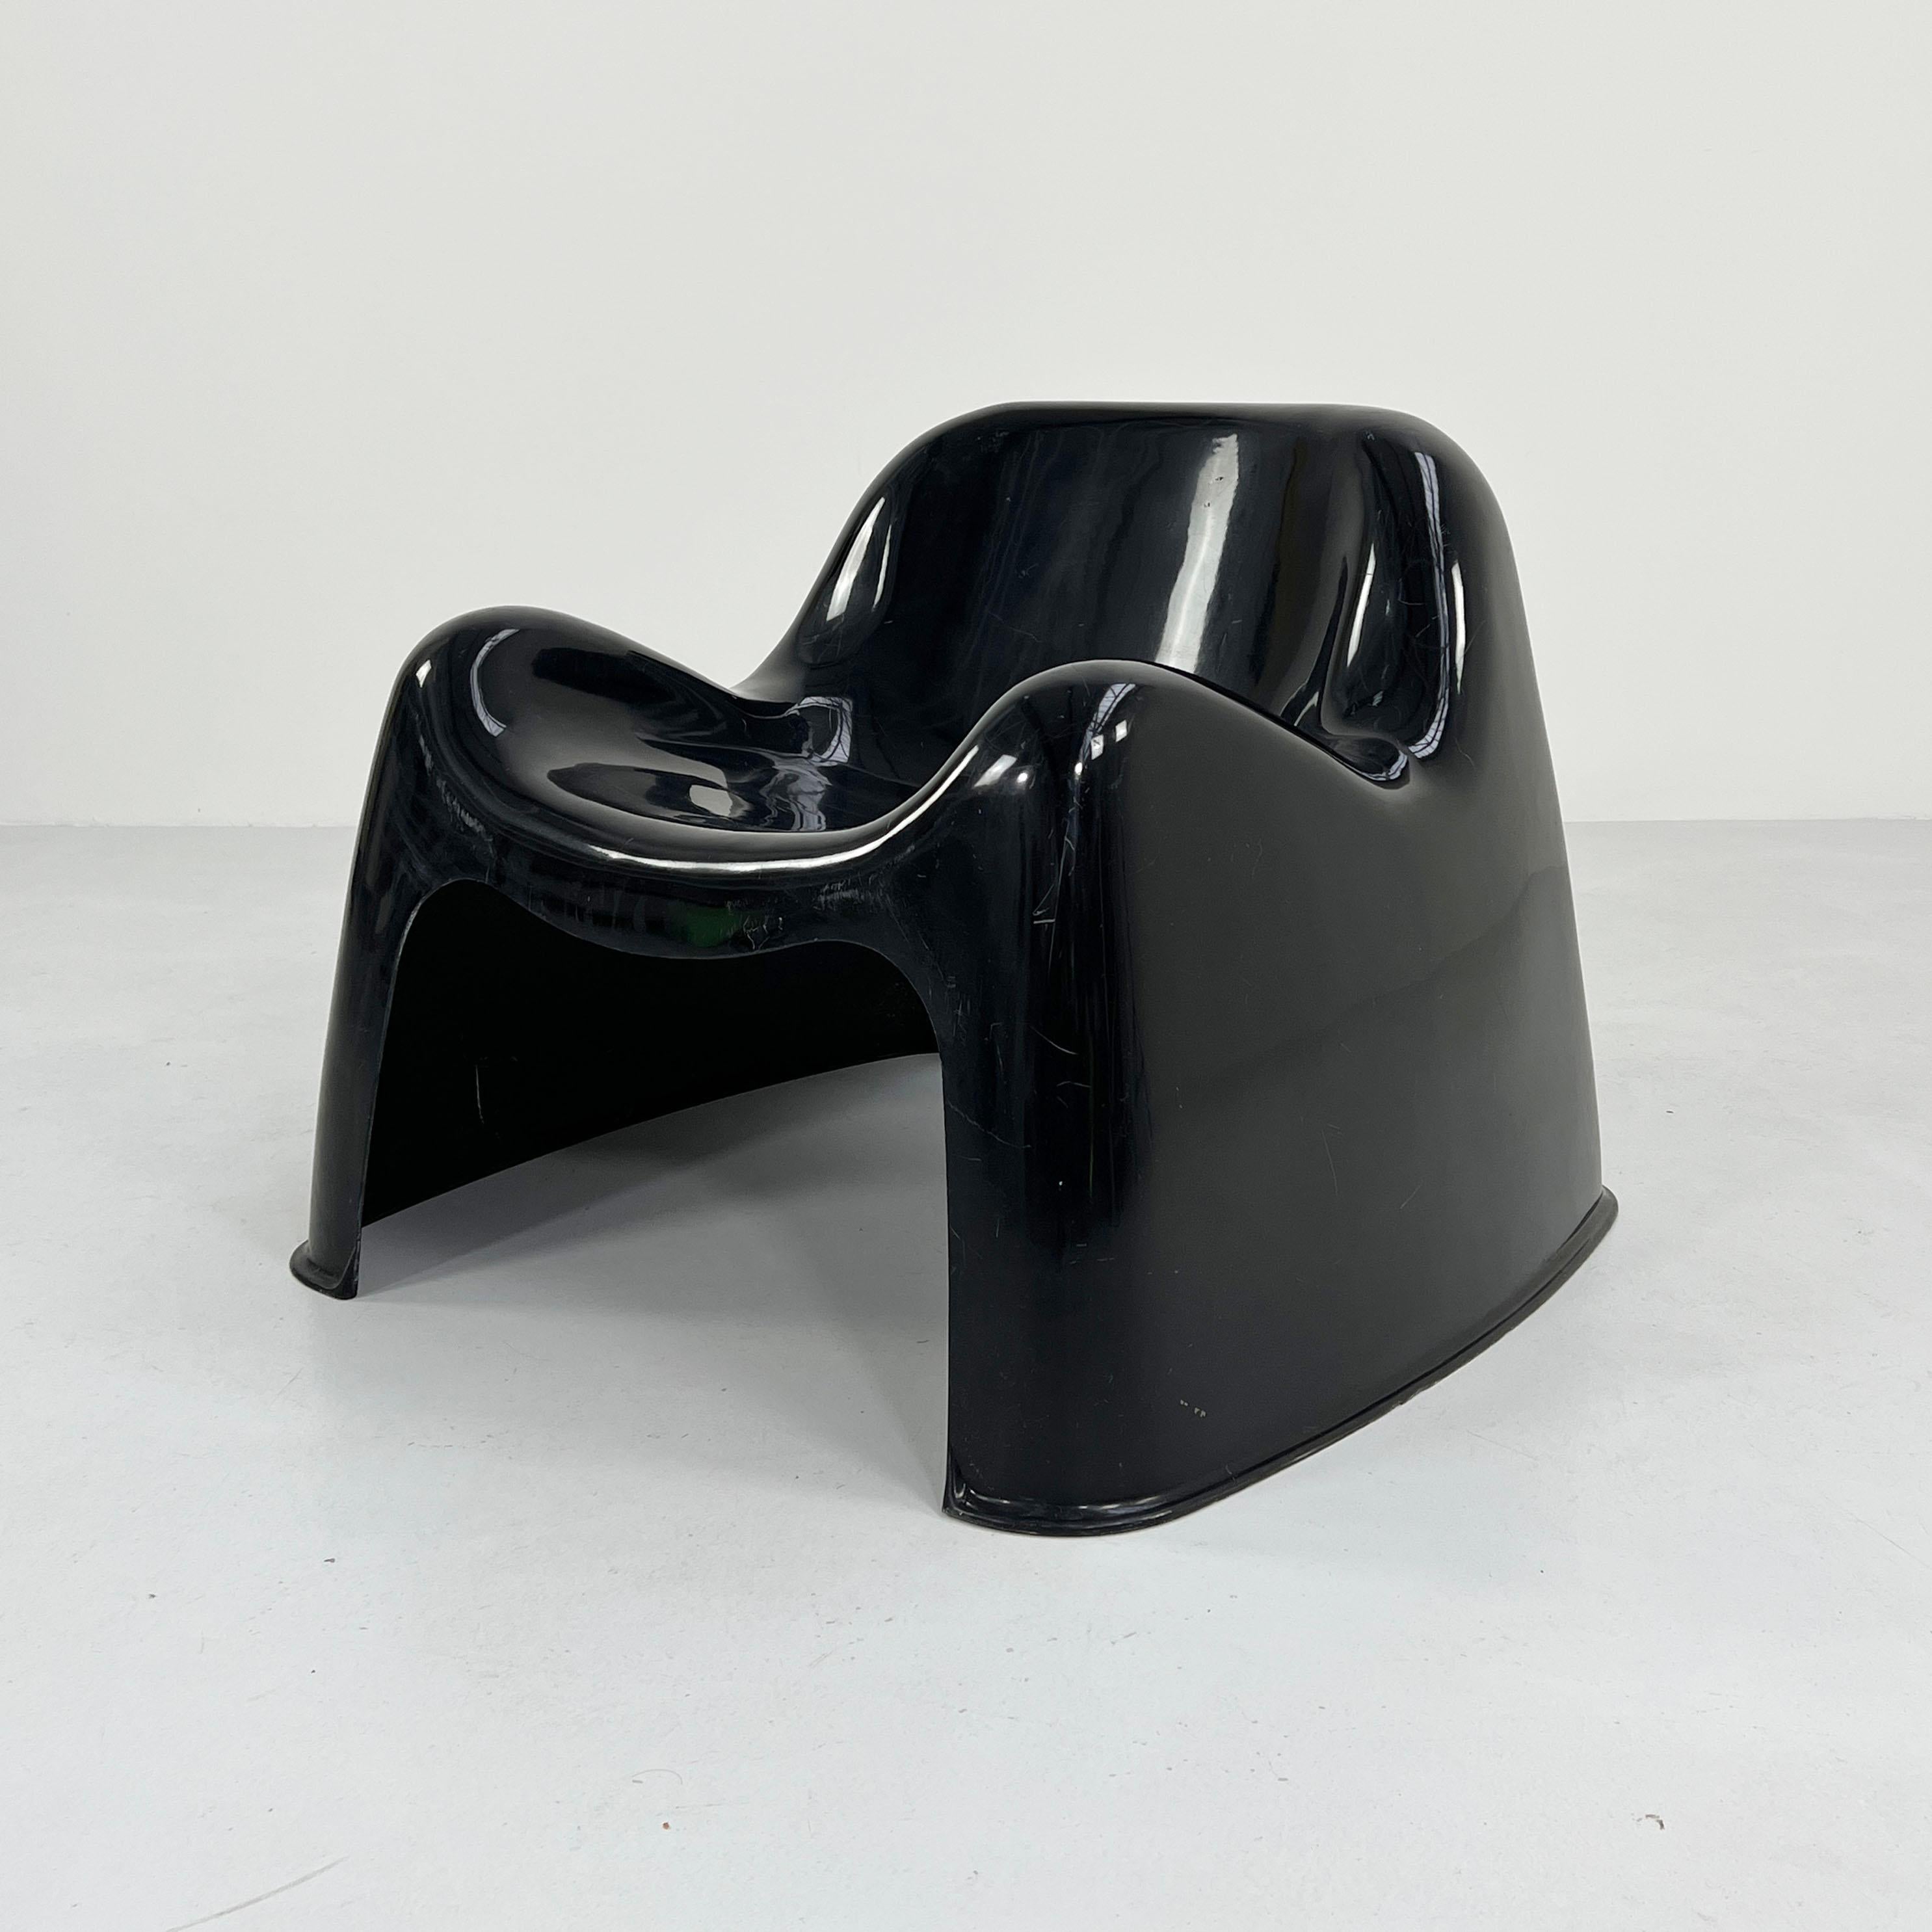 Black Toga Chair by Sergio Mazza for Artemide, 1960s
Designer - Sergio Mazza
Producer - Artemide
Model - Toga Chair
Design Period - Sixties
Measurements - width 73 cm x depth 70 cm x height 62 cm x seat height 37 cm
Materials - Plastic
Color